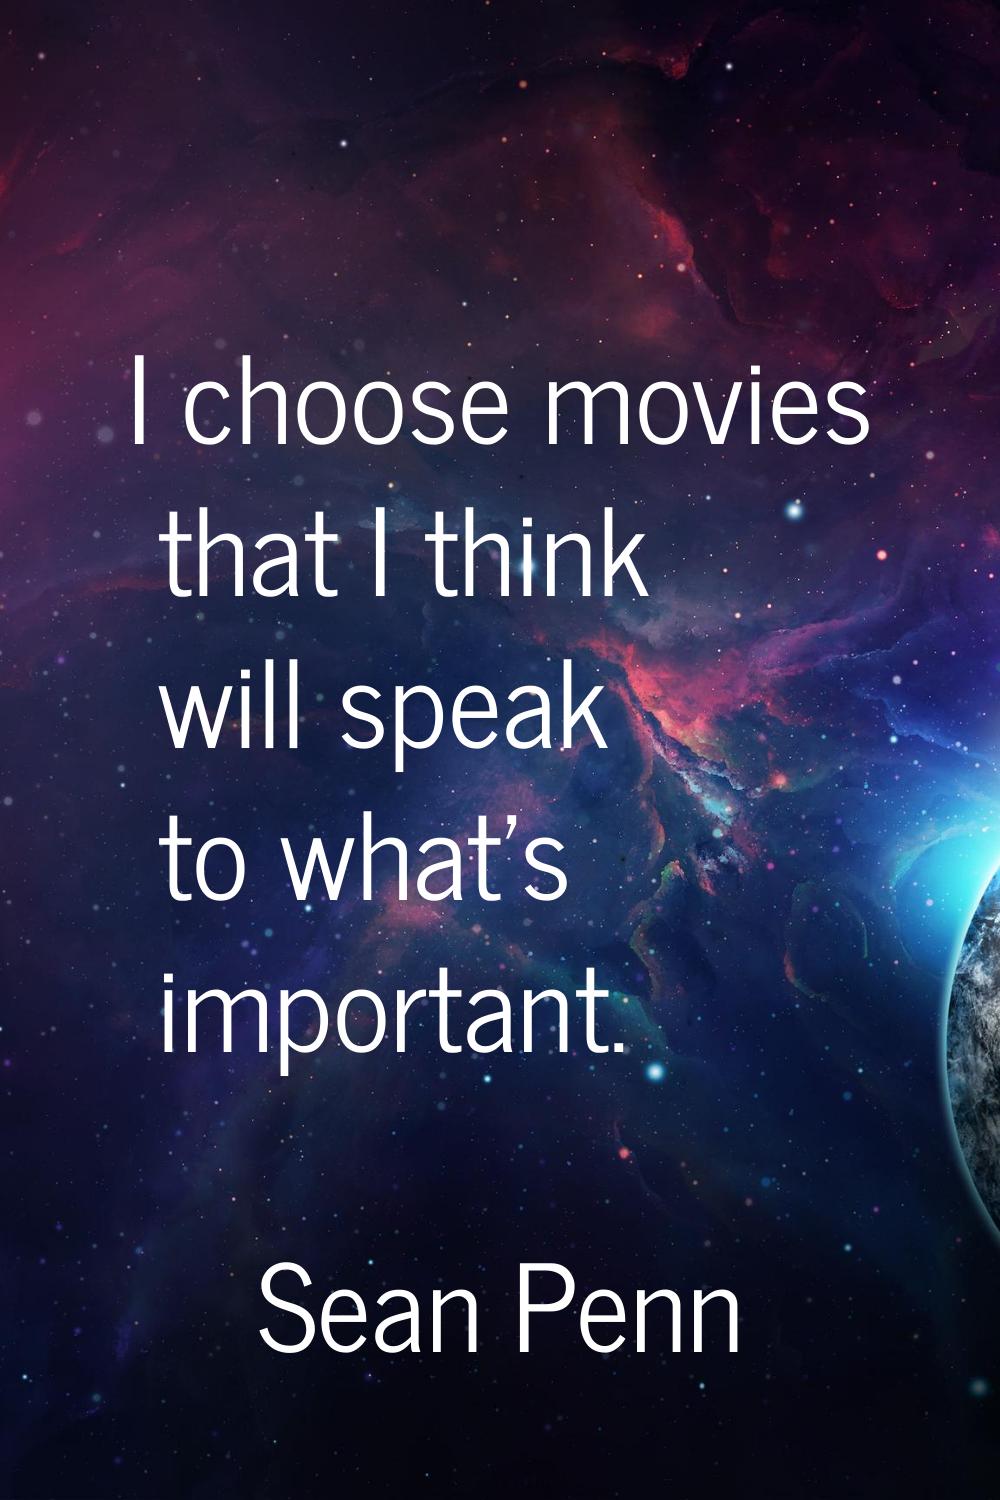 I choose movies that I think will speak to what's important.